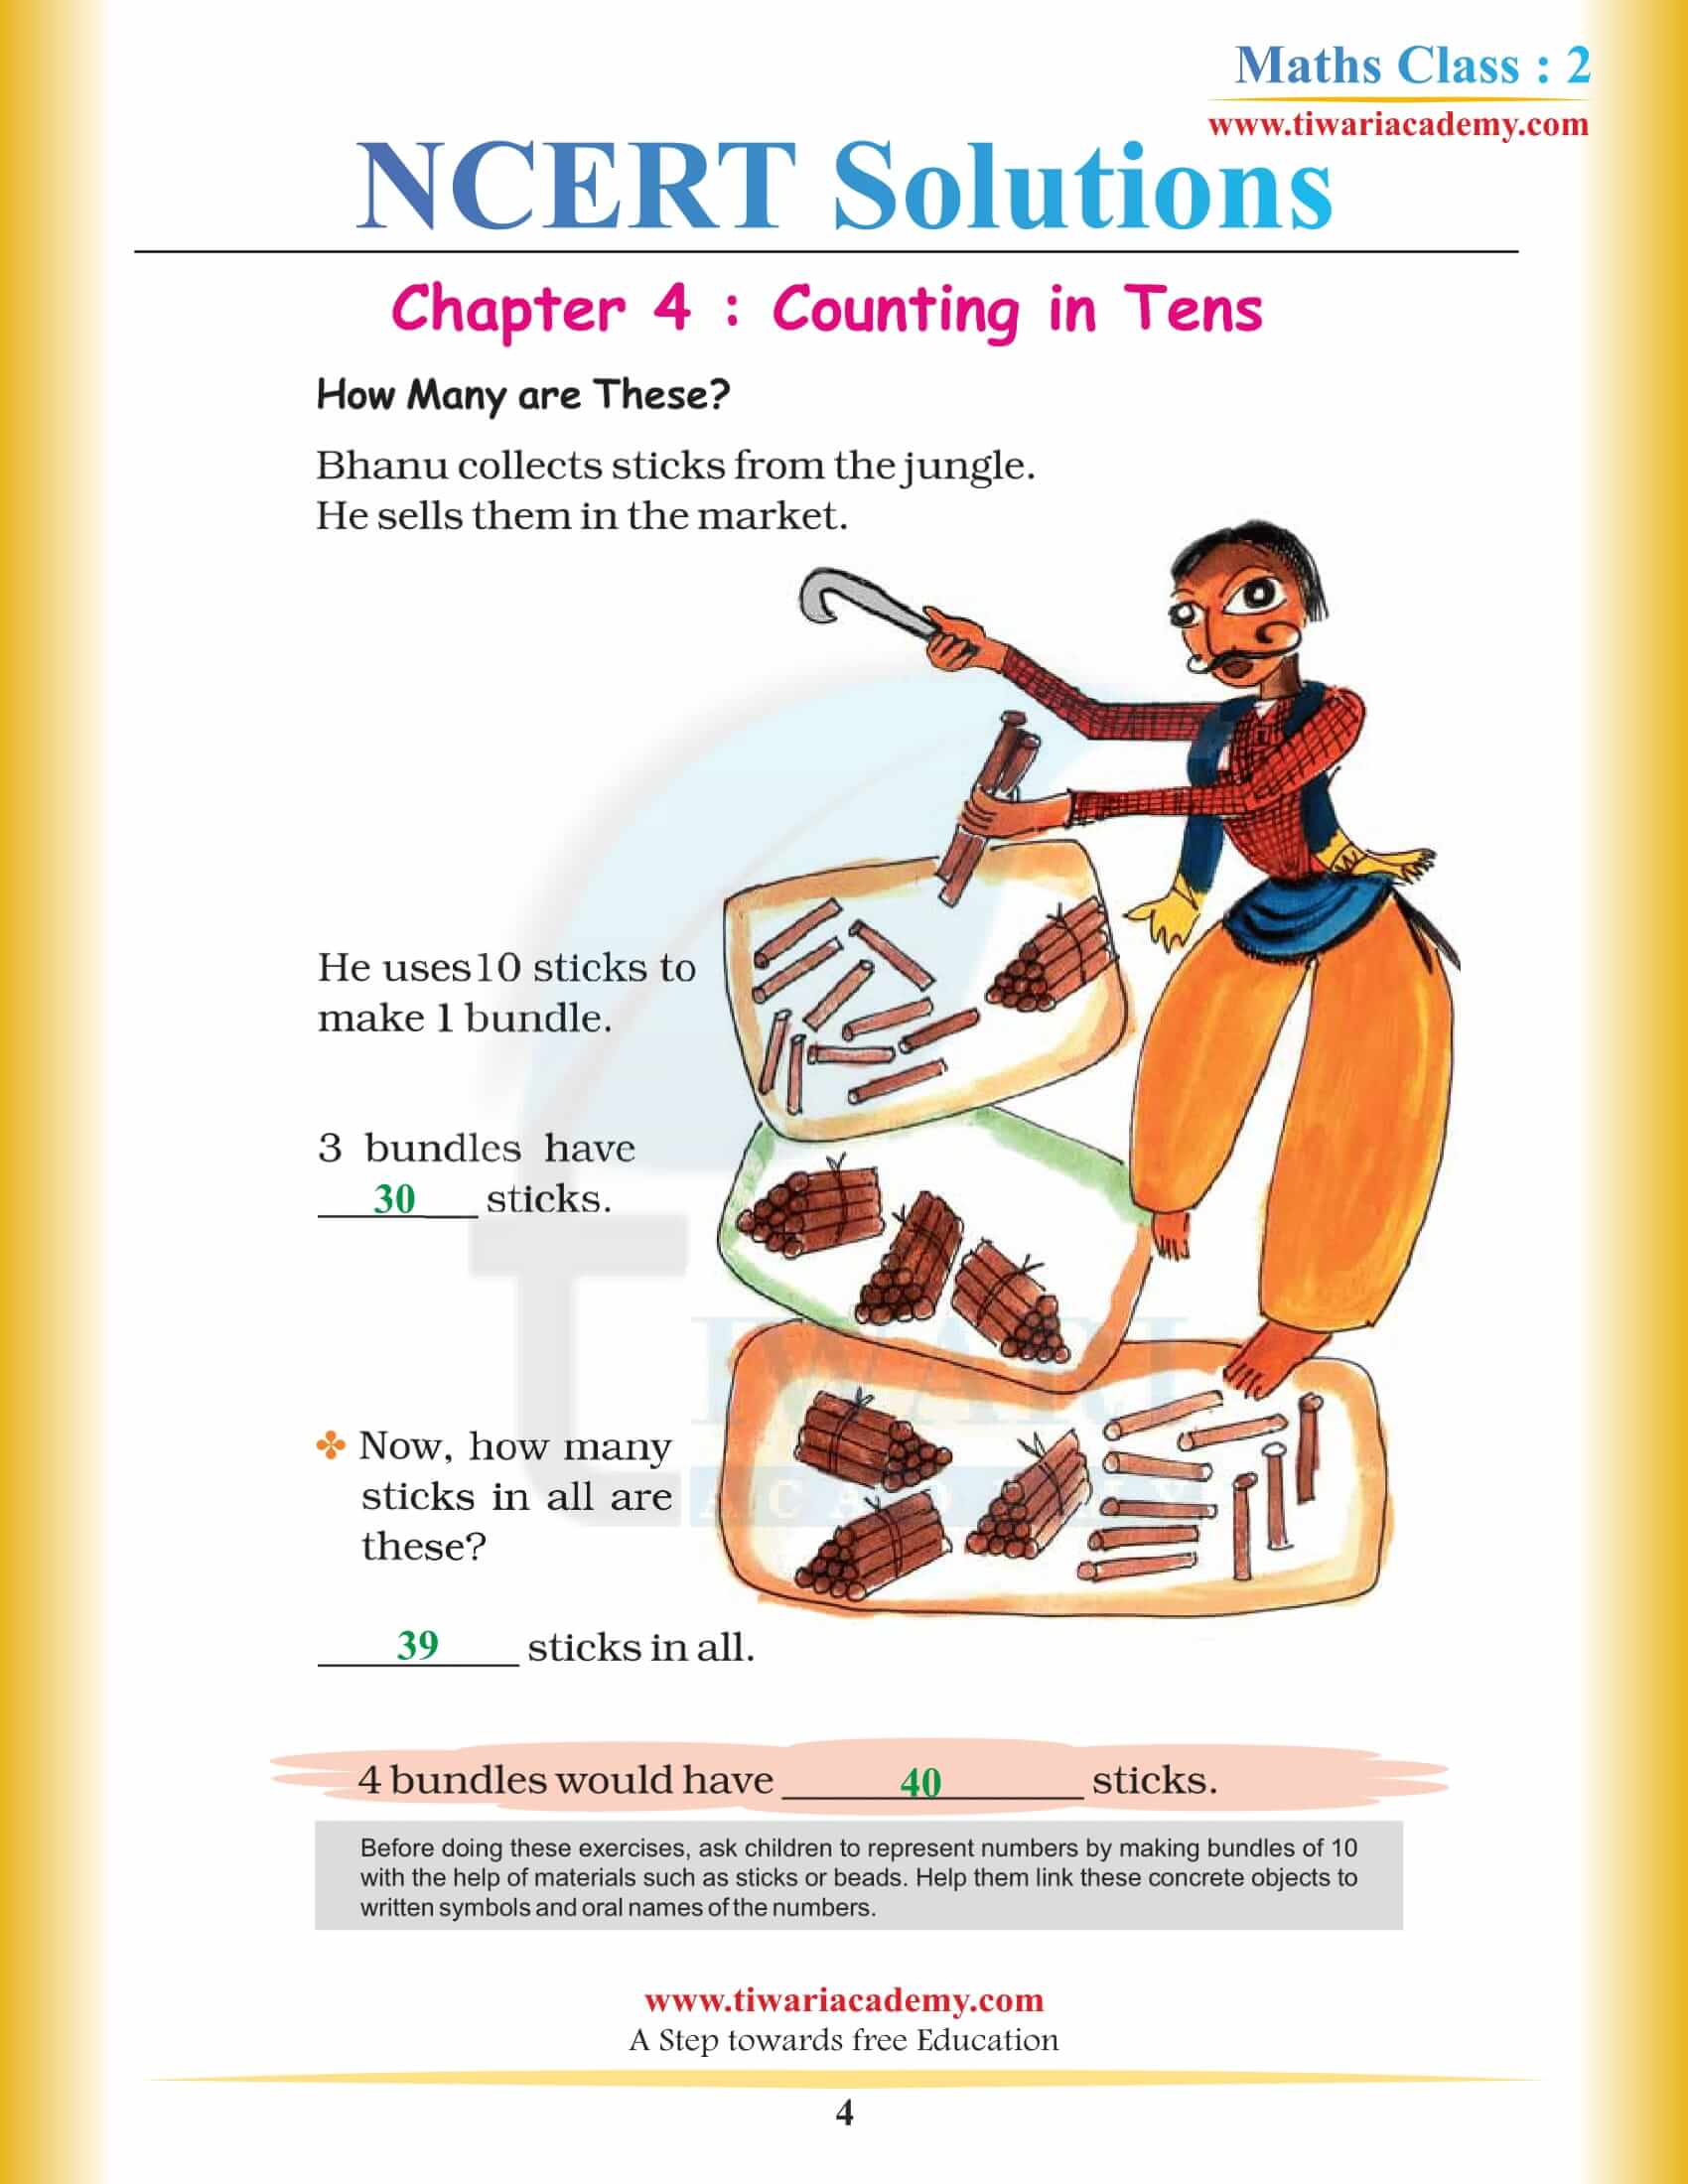 NCERT Solutions for Class 2 Maths Chapter 4 in PDF free